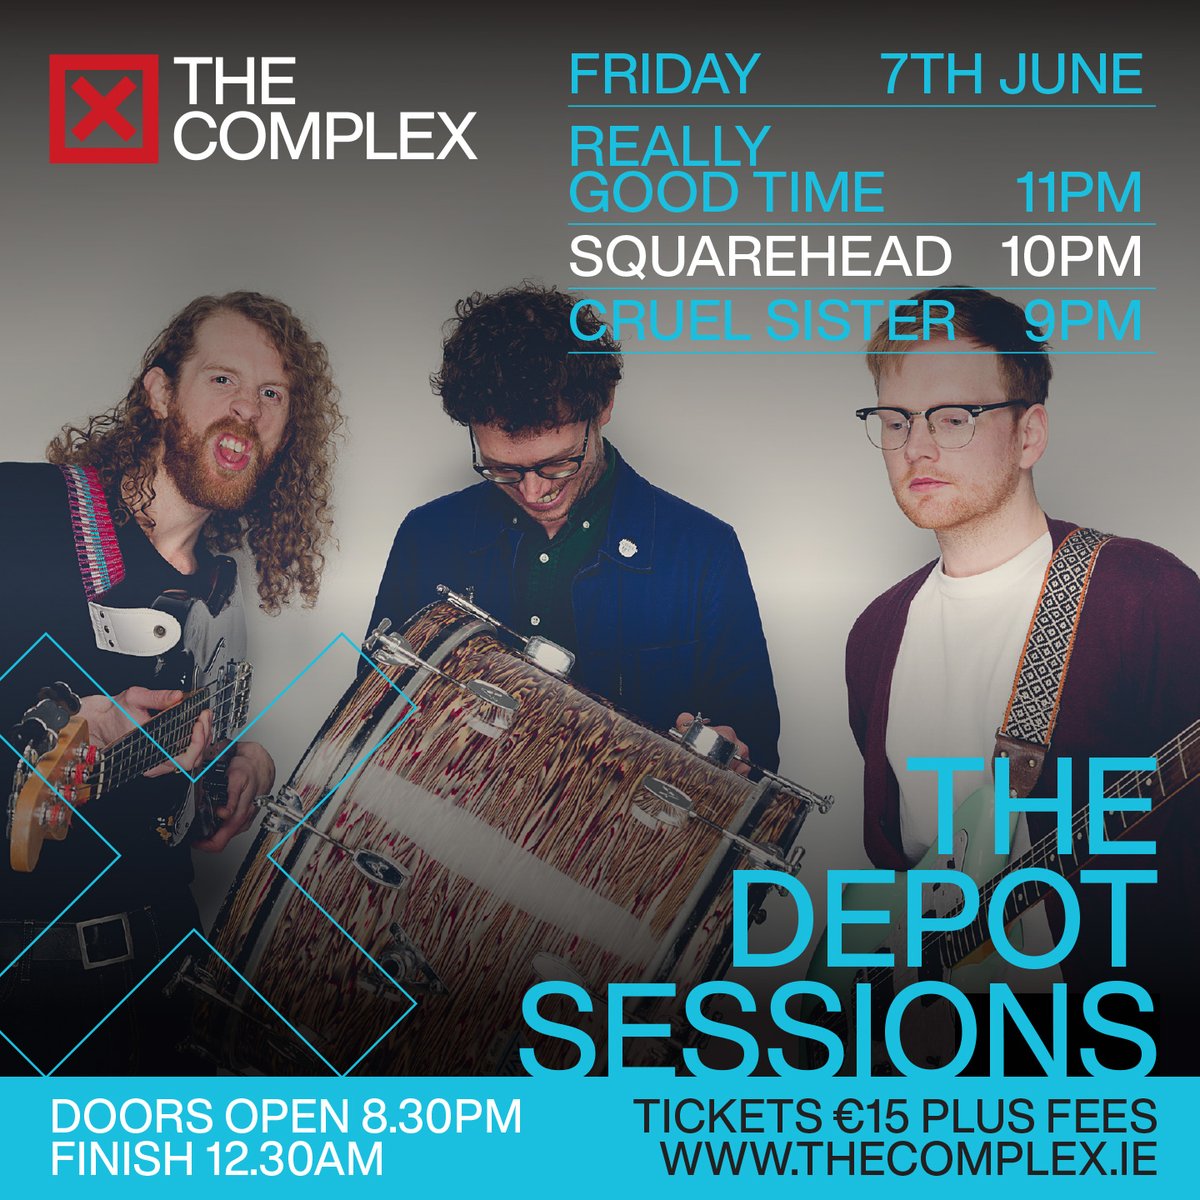 The Depot Sessions are two summer nights of live music, on 6 & 7 June, featuring some of Ireland’s most exciting bands. The second night will see Cruel Sister perform, followed by Squarehead and the launch of the new EP by Really Good Time. Book now: thecomplex.ie/event-details/…